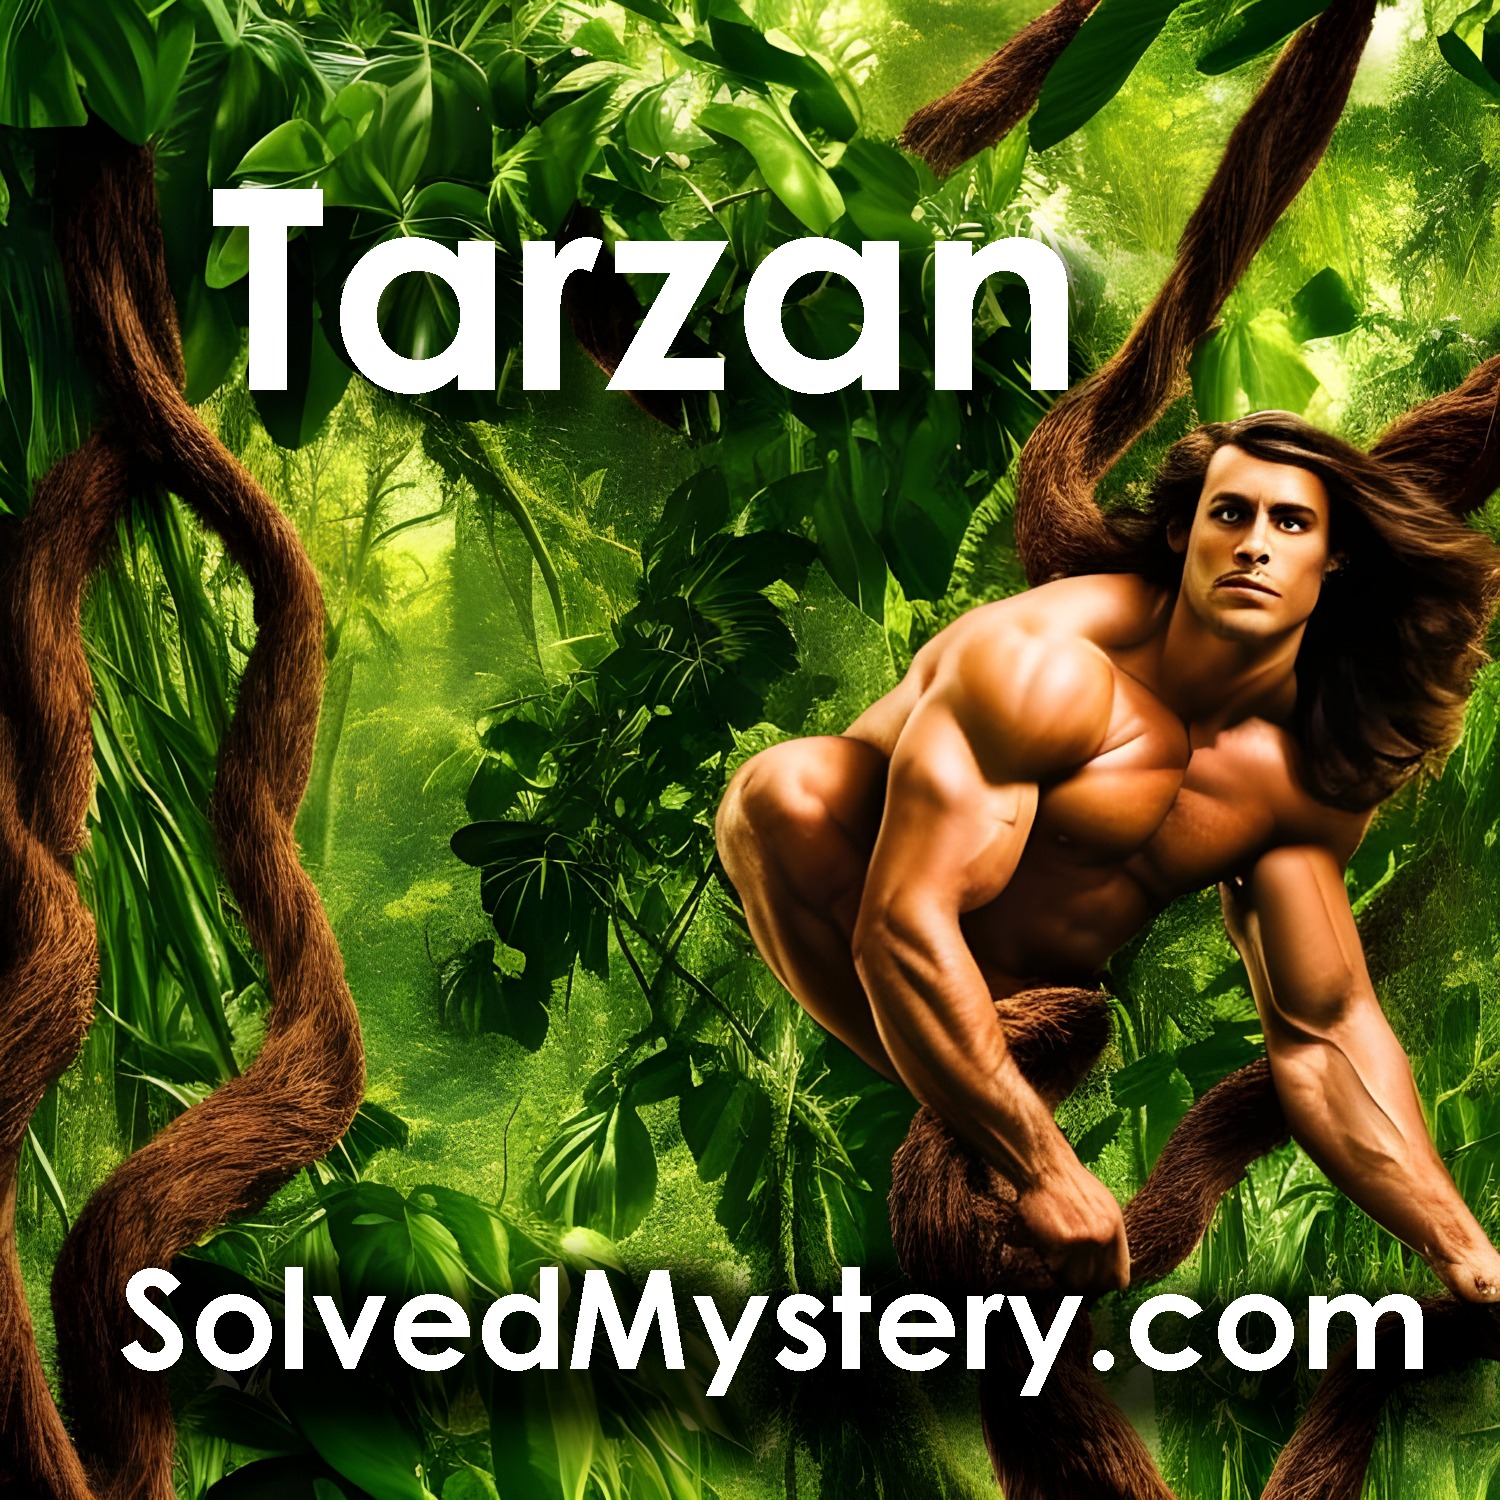 Tarzan: Battle with the Apes